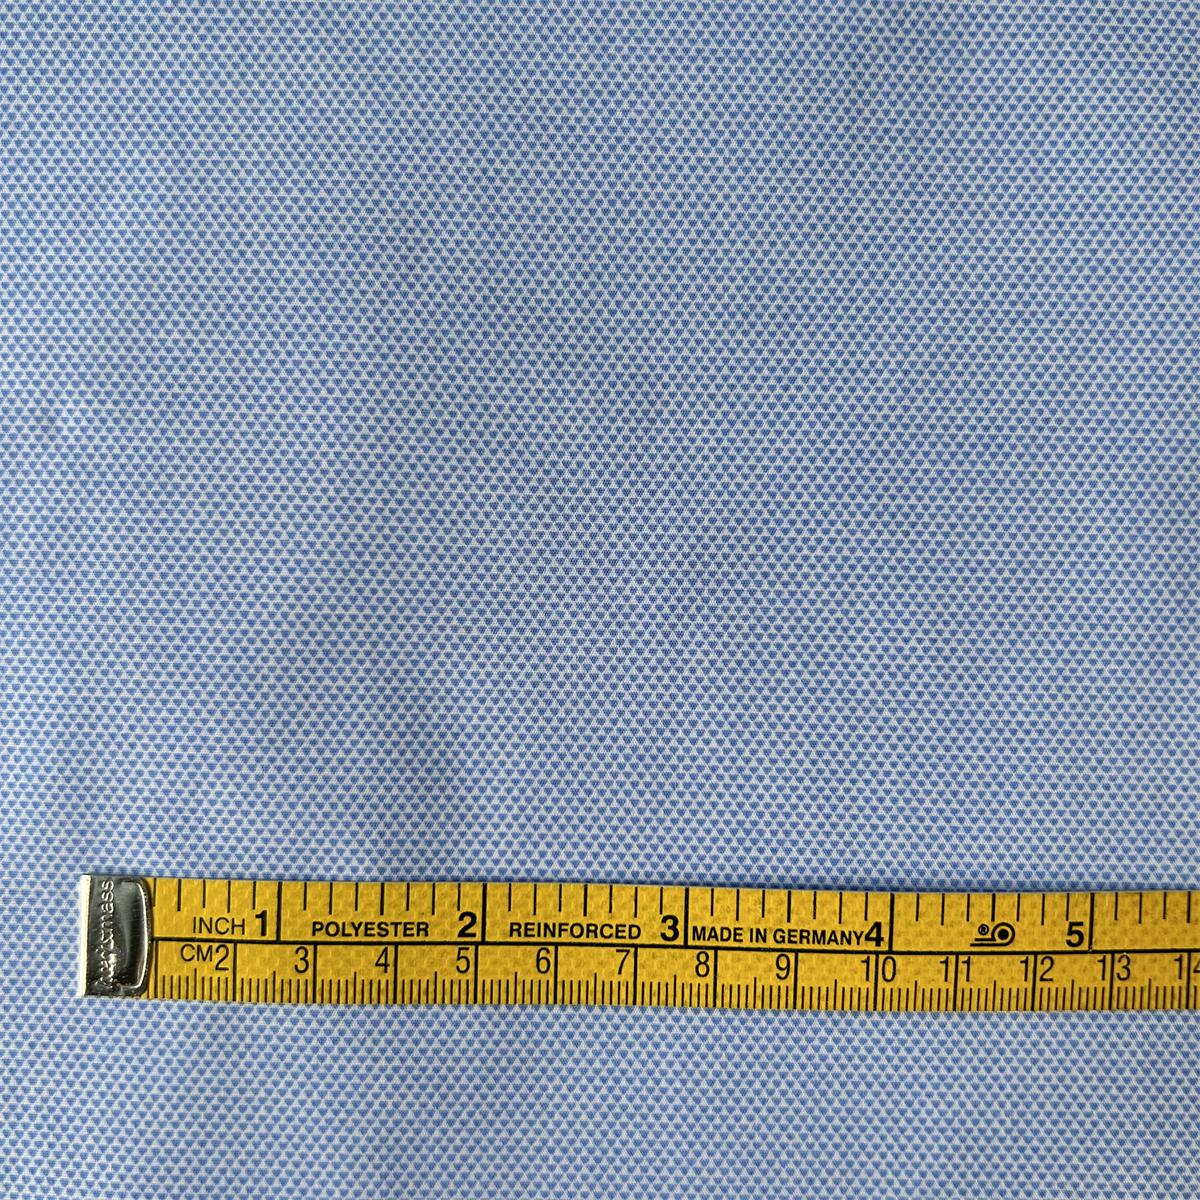 Shirts Fabric Manufacturer in China soft comfortable printed bamboo polyester spandex woven shirt fabric for mens casual shirts